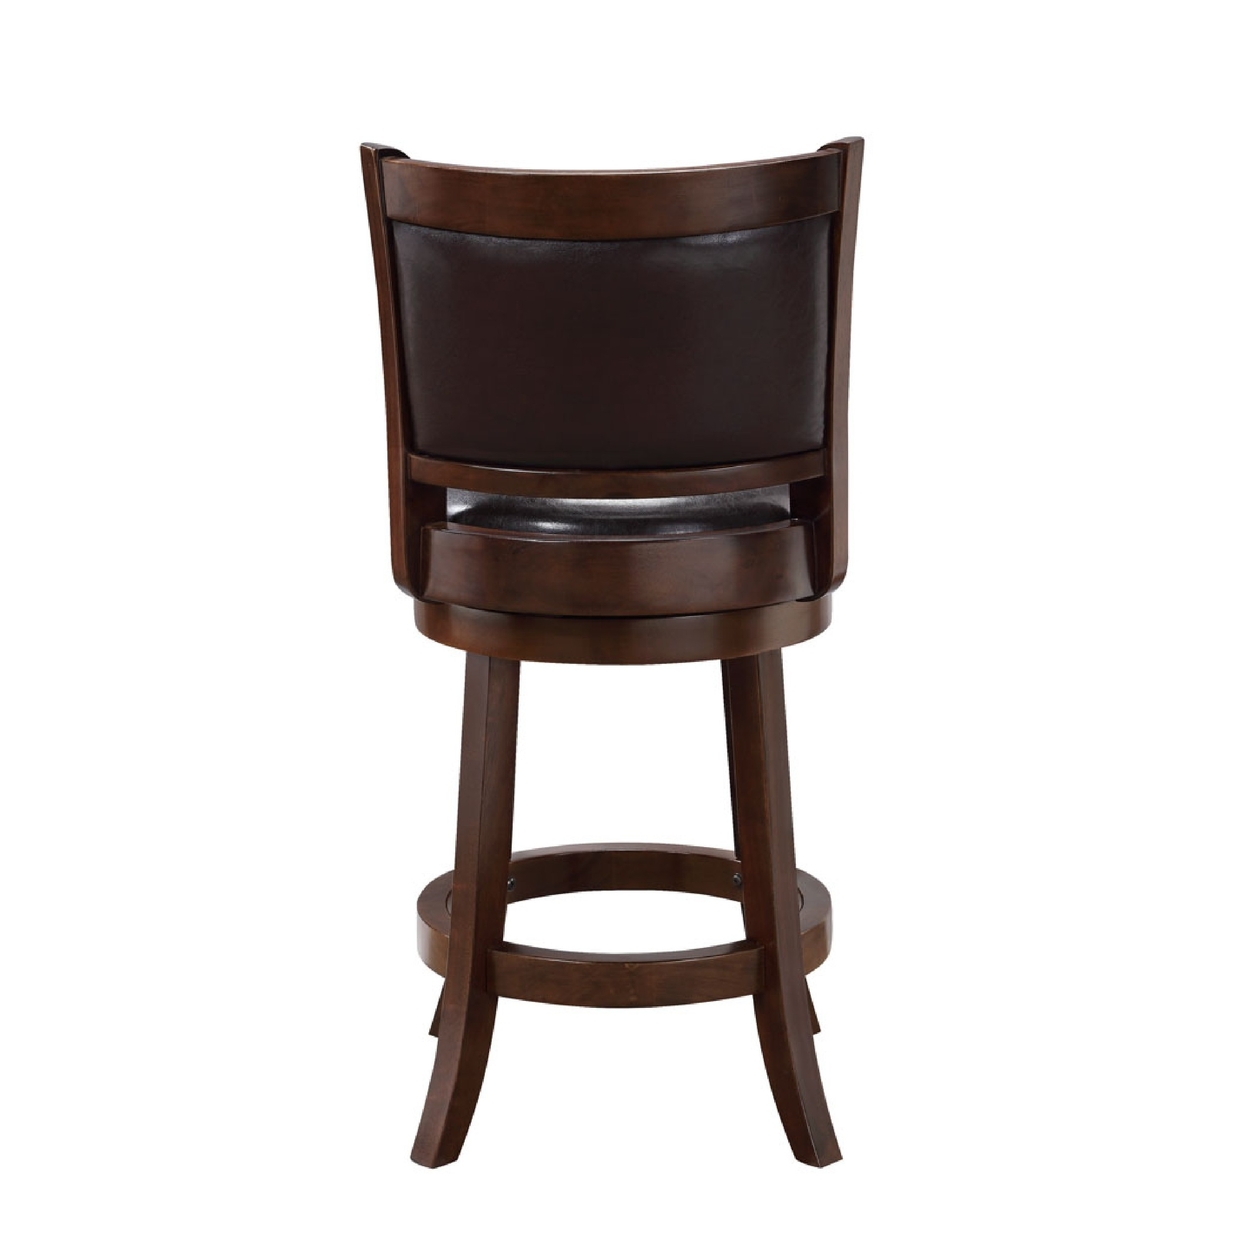 Pal 24 Inch Swivel Counter Stool, Solid Wood, Faux Leather, Espresso Brown- Saltoro Sherpi